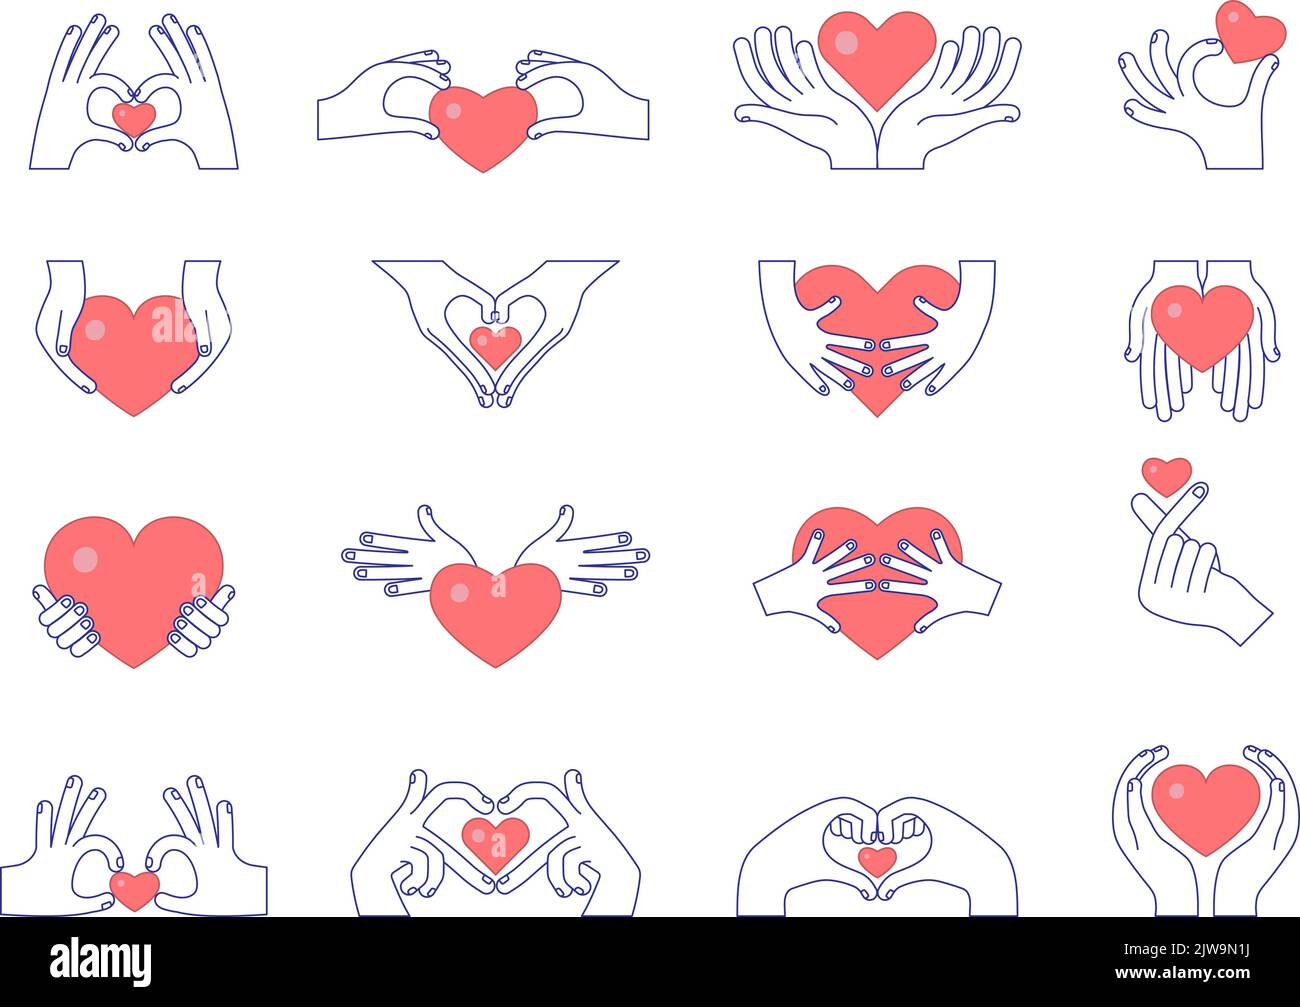 Hands with hearts. Conceptual symbols of donation happiness friendship and love pictures recent vector set Stock Vector